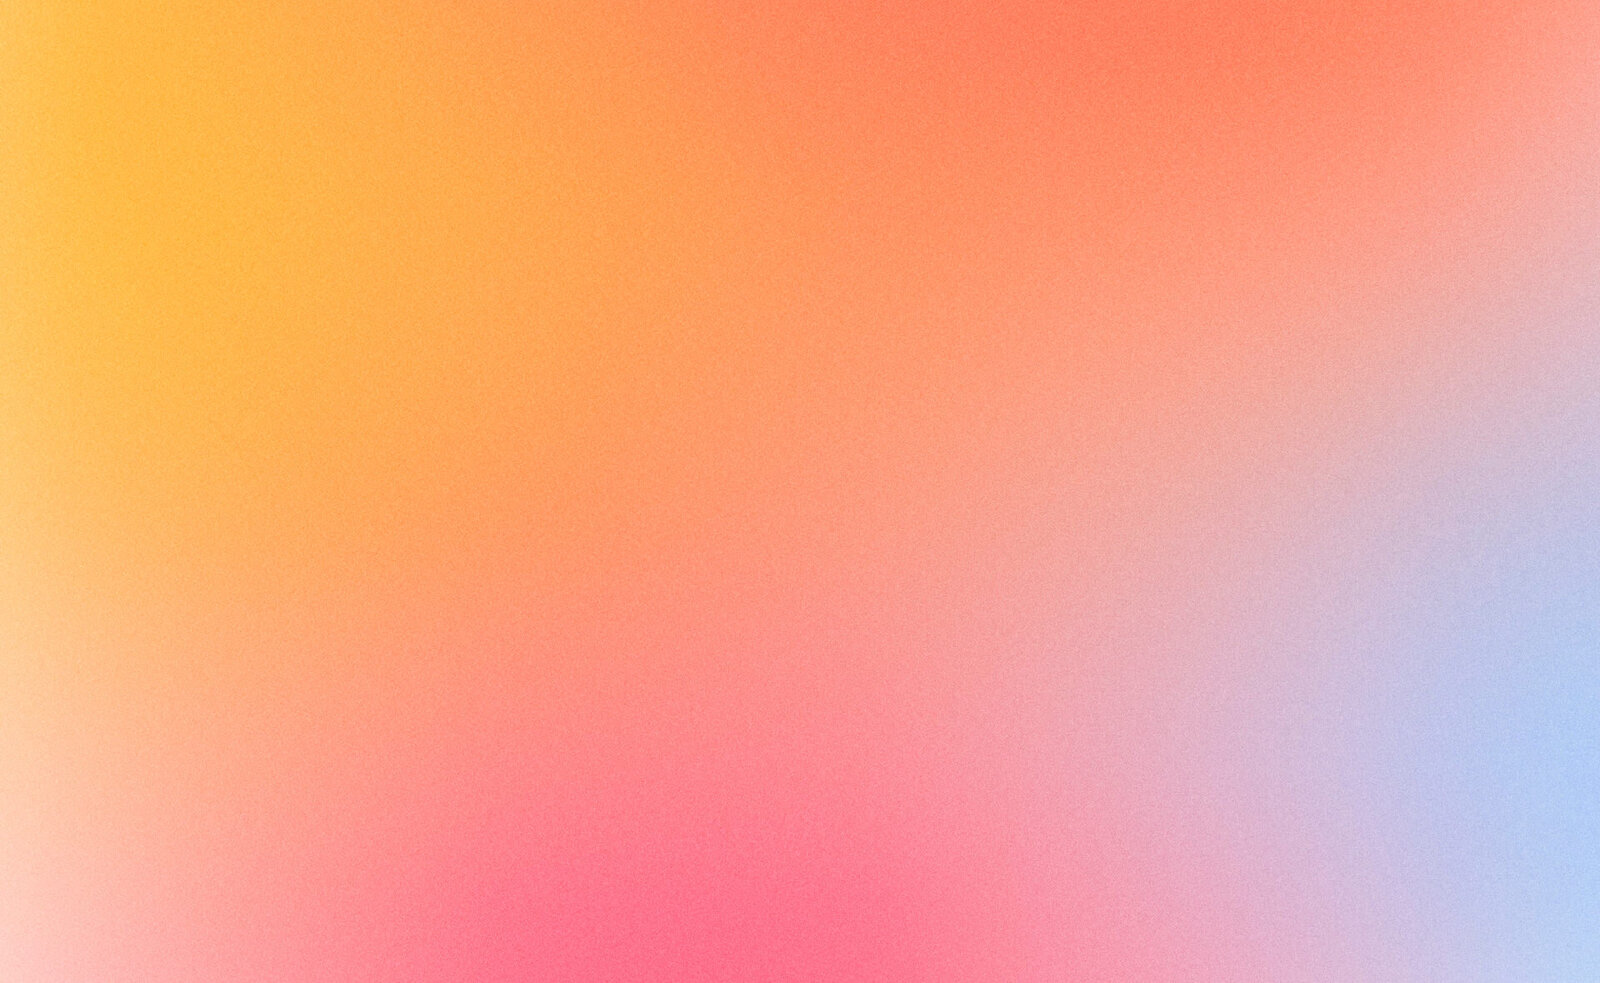 gradient background of yellow, orange, pink and blue